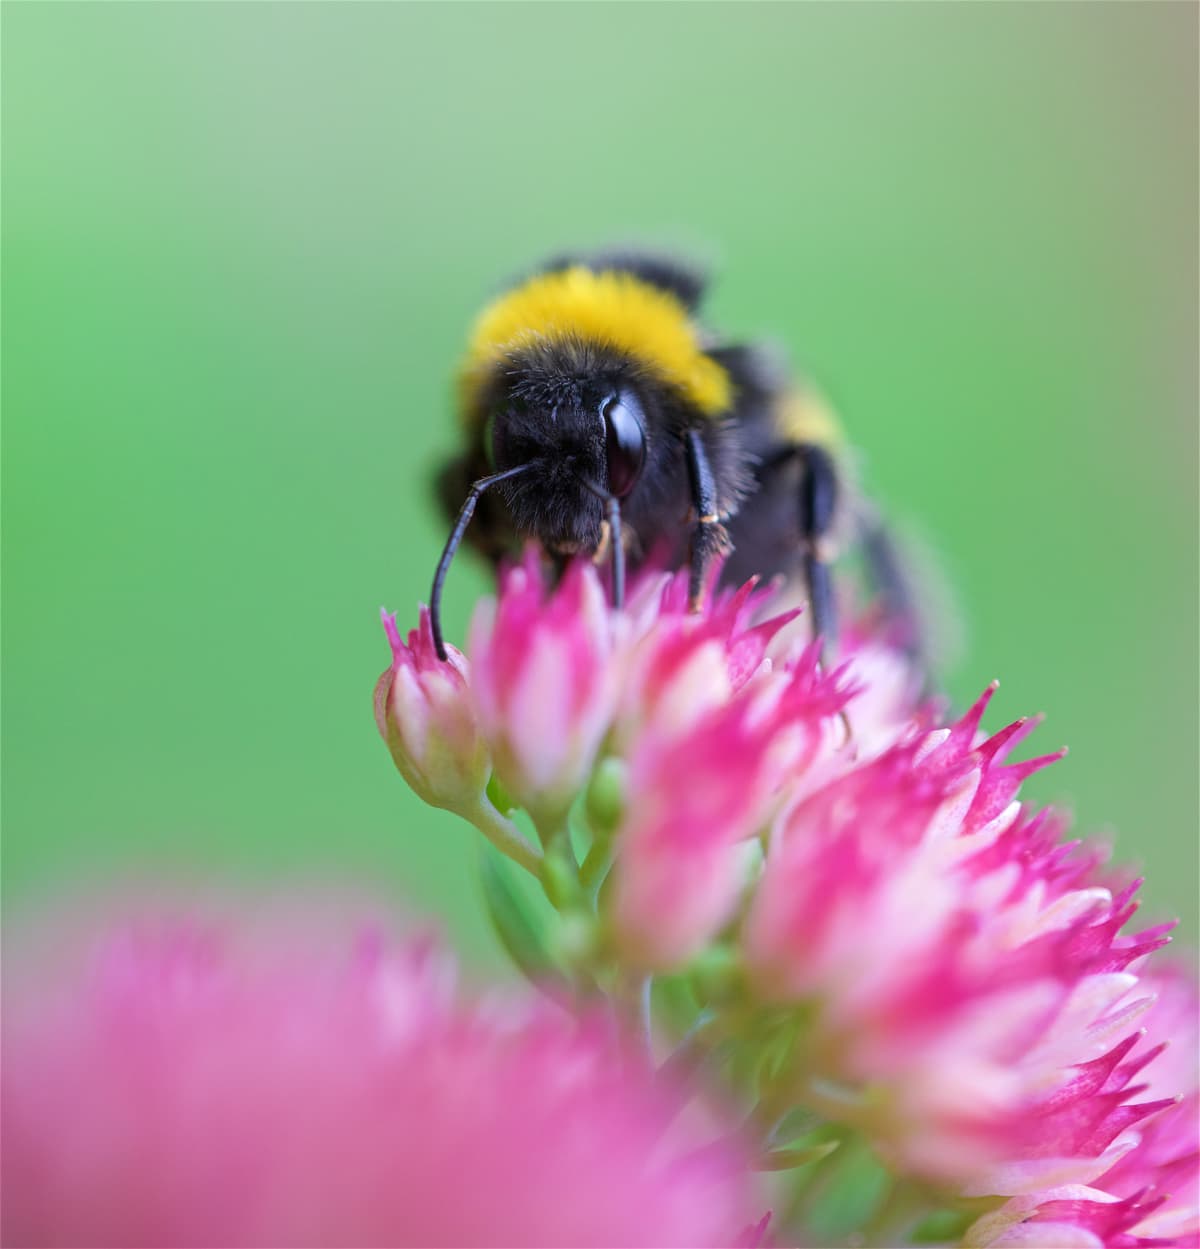 A close up of a bumble bee collecting pollen on an Ice Plant in summer